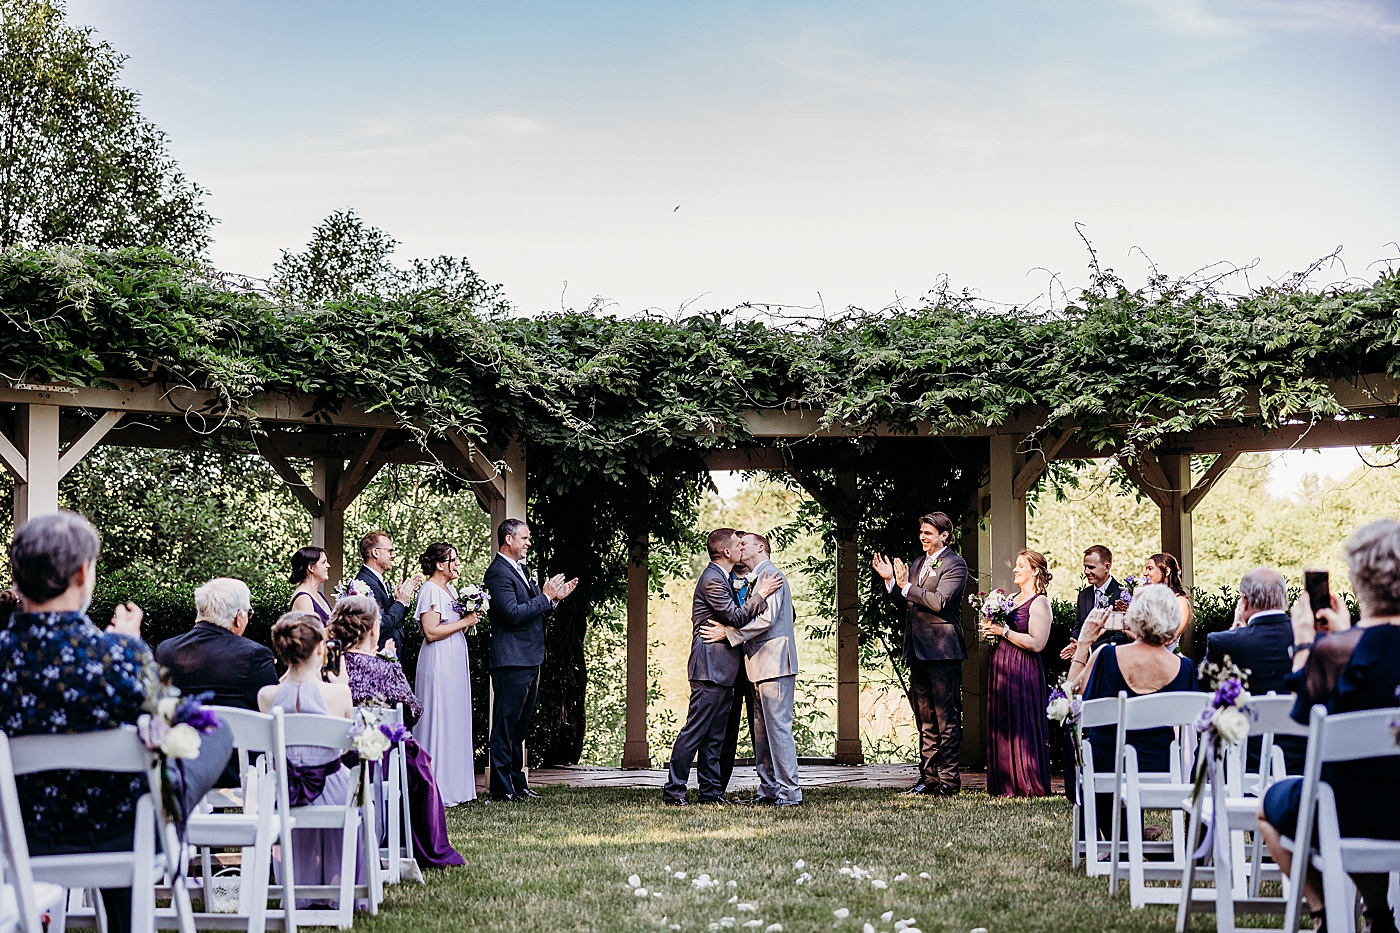 First kiss between the grooms at same-sex wedding at Sanders Estate in Washington state | Megan Montalvo Photography